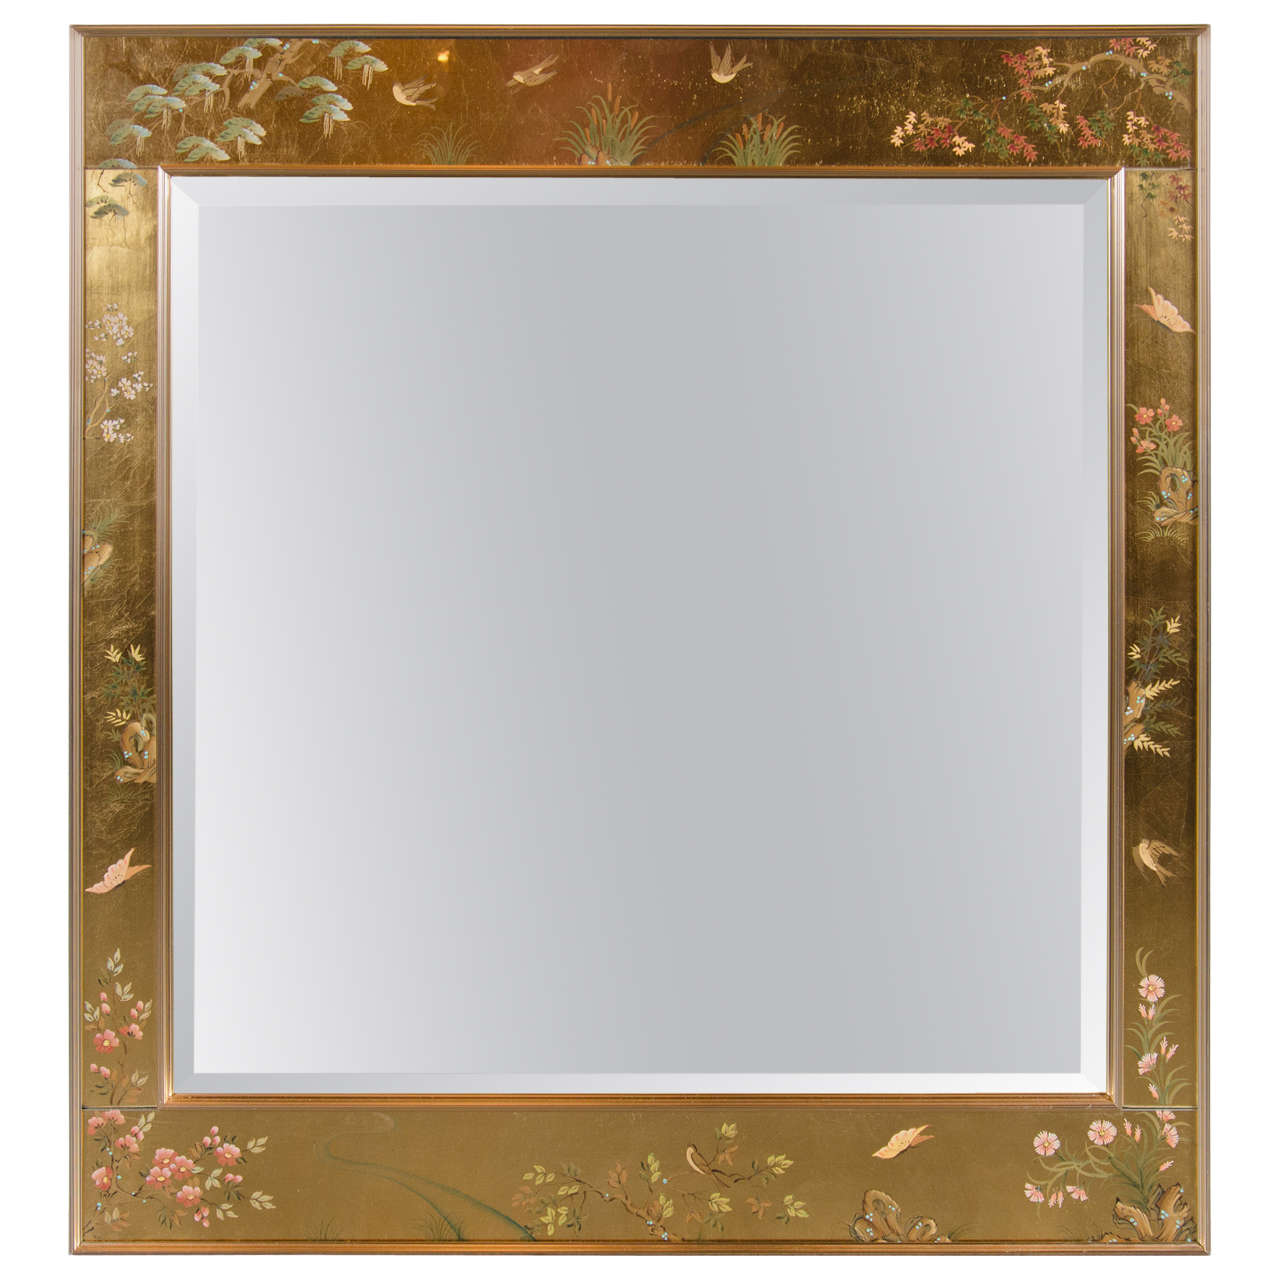 La Barge Chinoiserie Reverse Hand-Painted Gilt Mirror Signed by Harriet Jansma